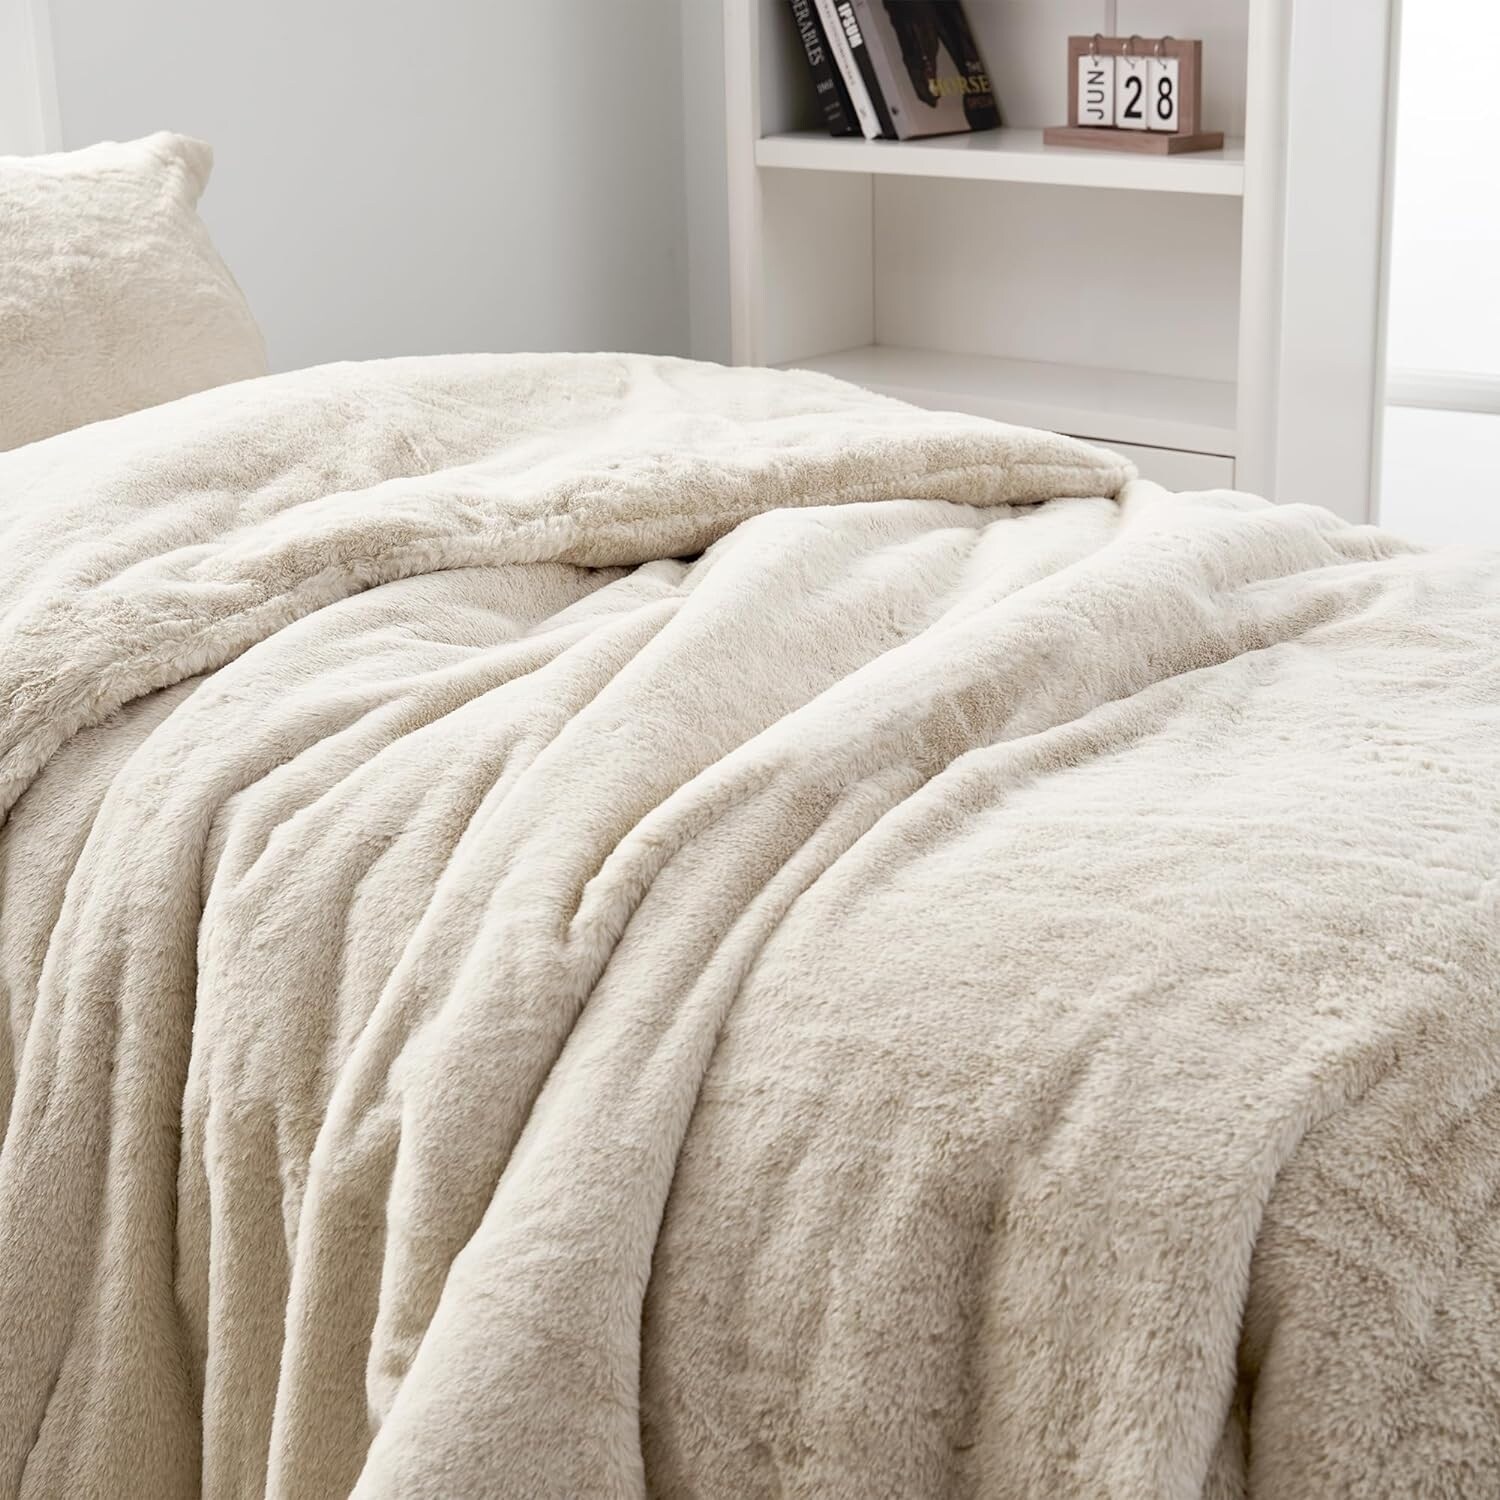 Mary Had a Little - Coma Inducer Oversized Comforter - Lamb